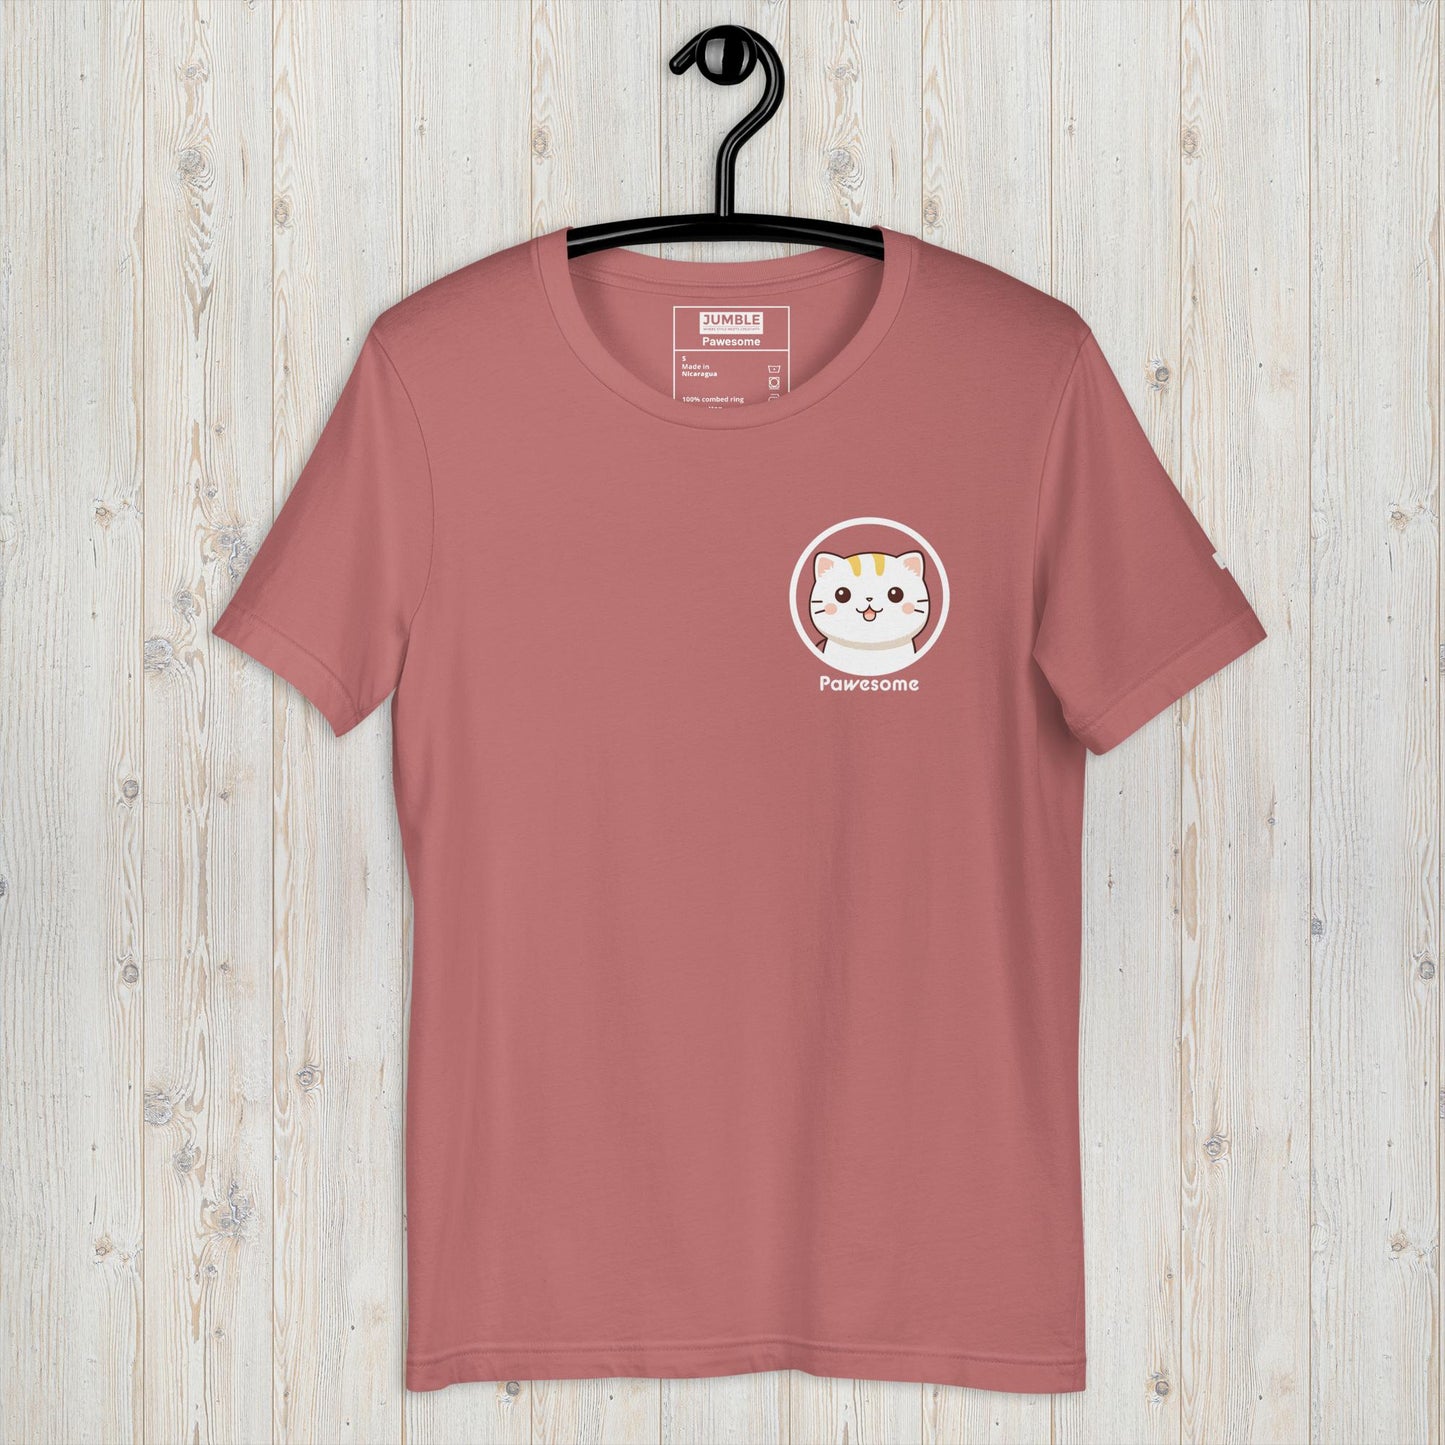 Pawesome Unisex t-shirt in mauve on hanger